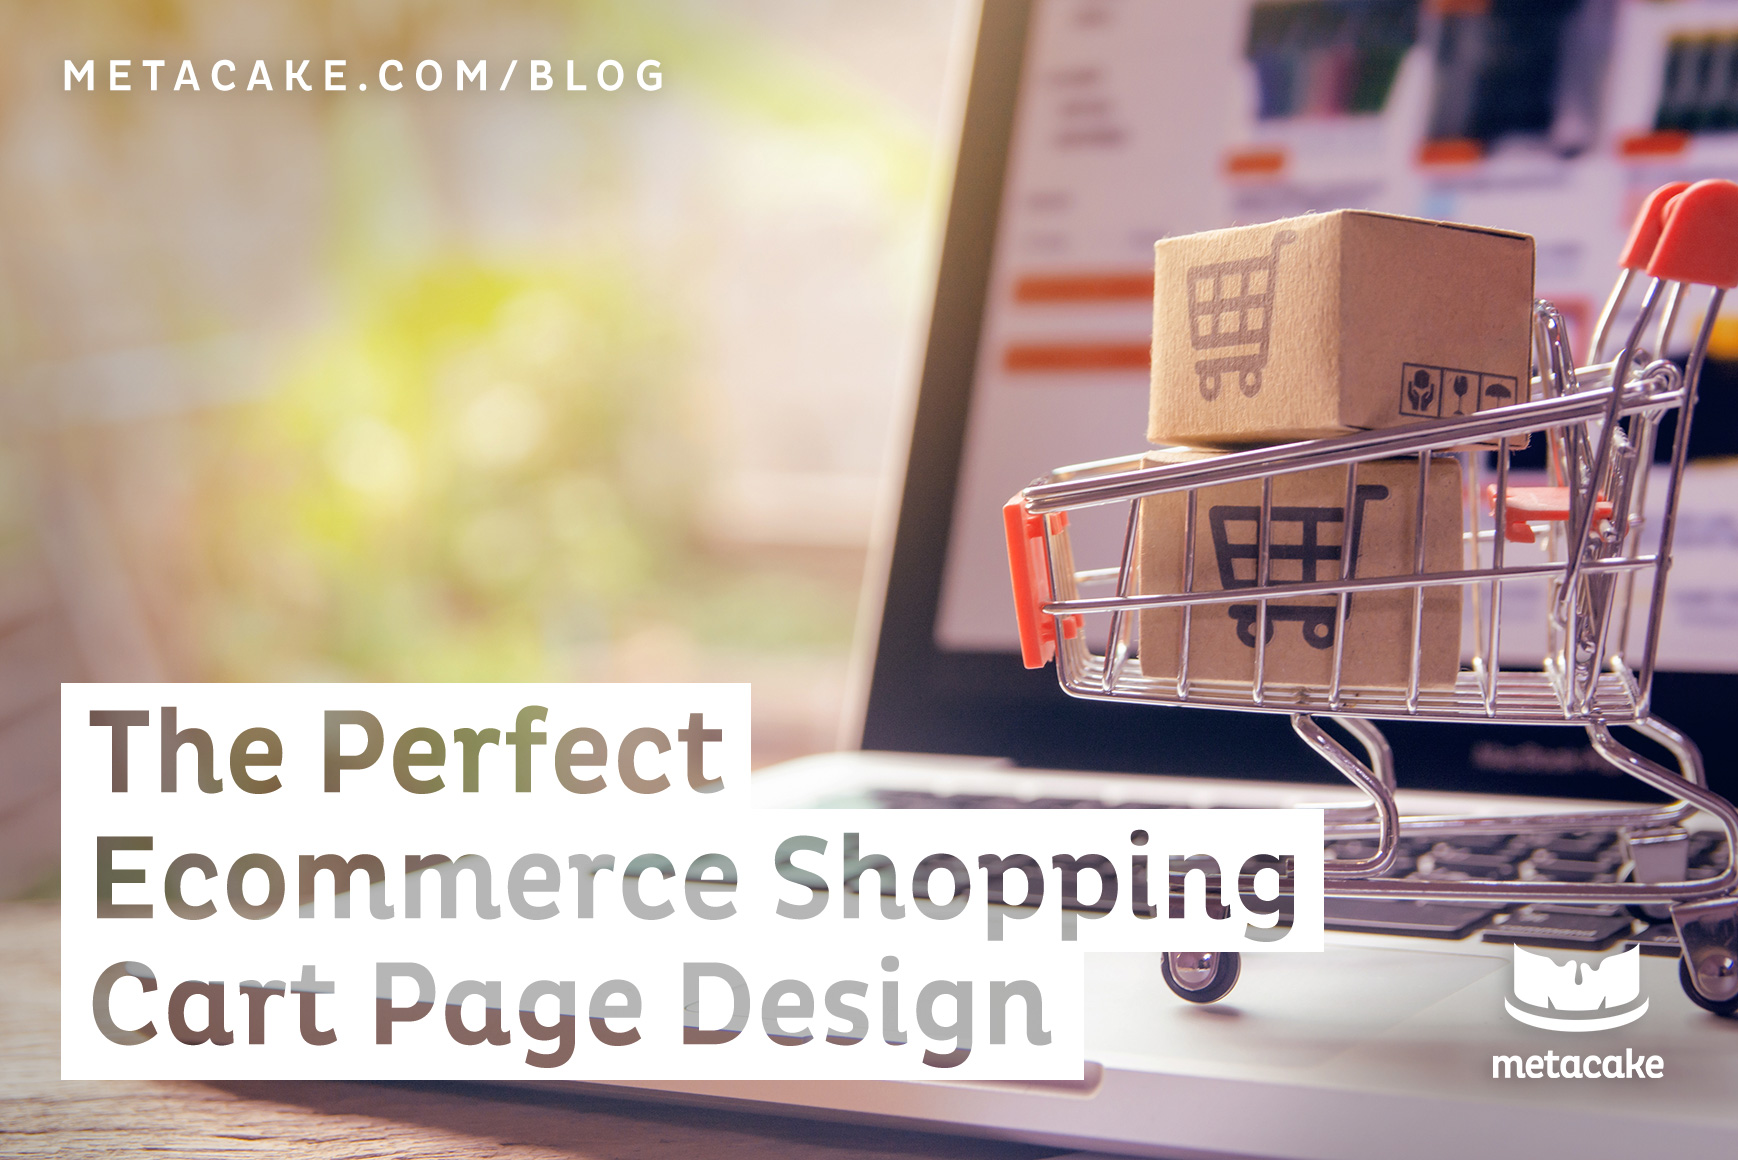 https://metacake.com/wp-content/uploads/2022/02/Blog-Placeholder-The_Perfect_Ecommerce_Shopping_Cart_Page_Design-1738x1160-1.jpg